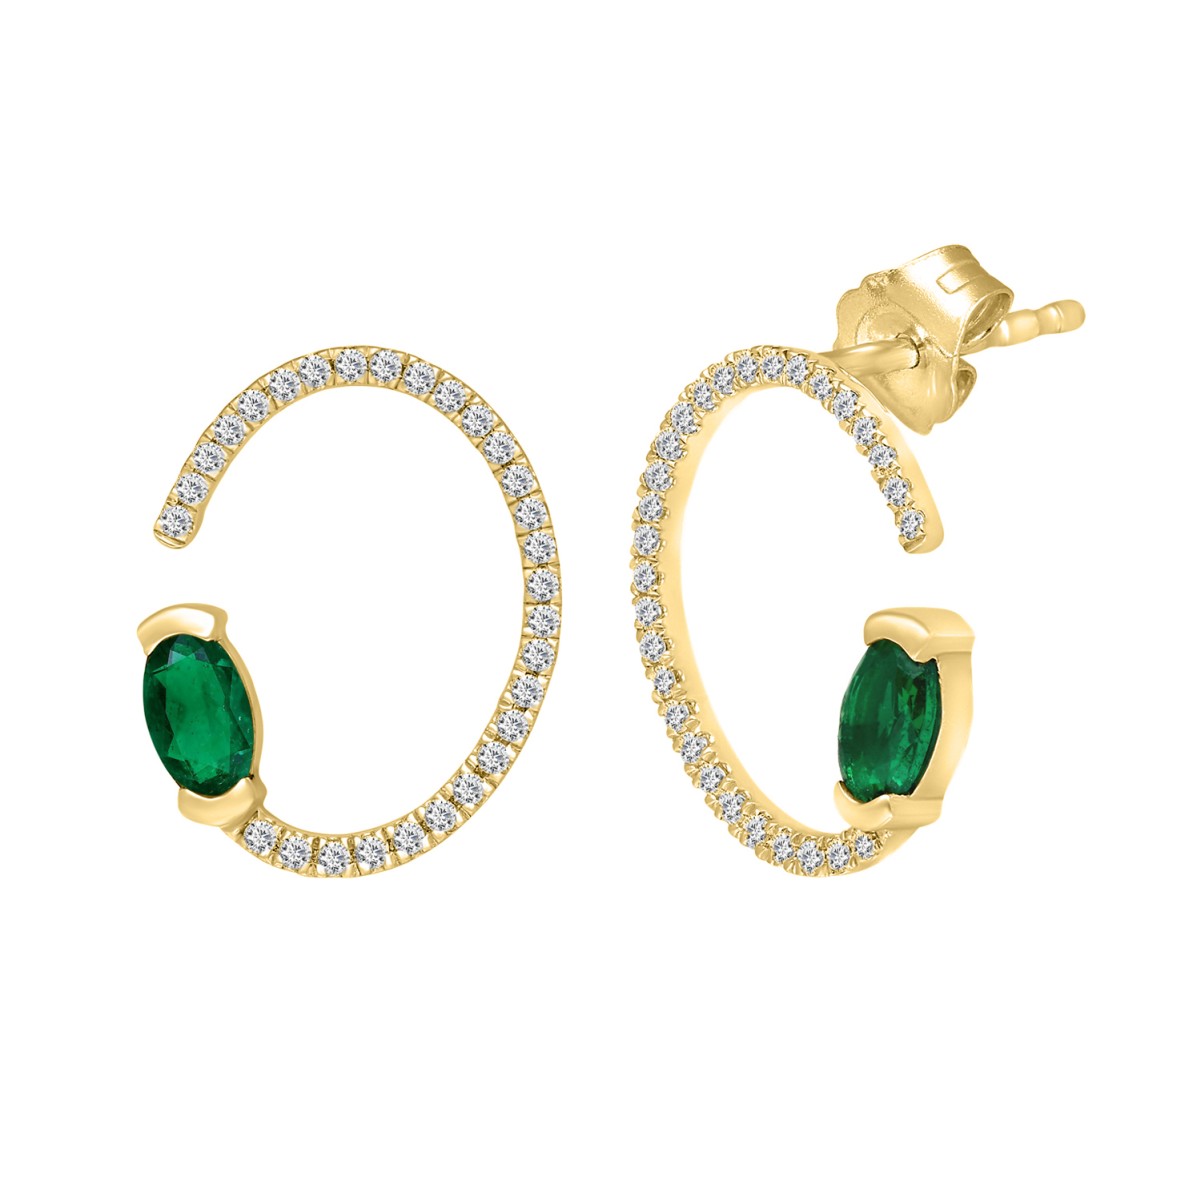 14K YELLOW GOLD 3/4CT ROUND/OVAL DIAMOND LADIES EARRINGS(COLOR STONE OVAL GREEN EMERALD DIAMOND 1/2CT)